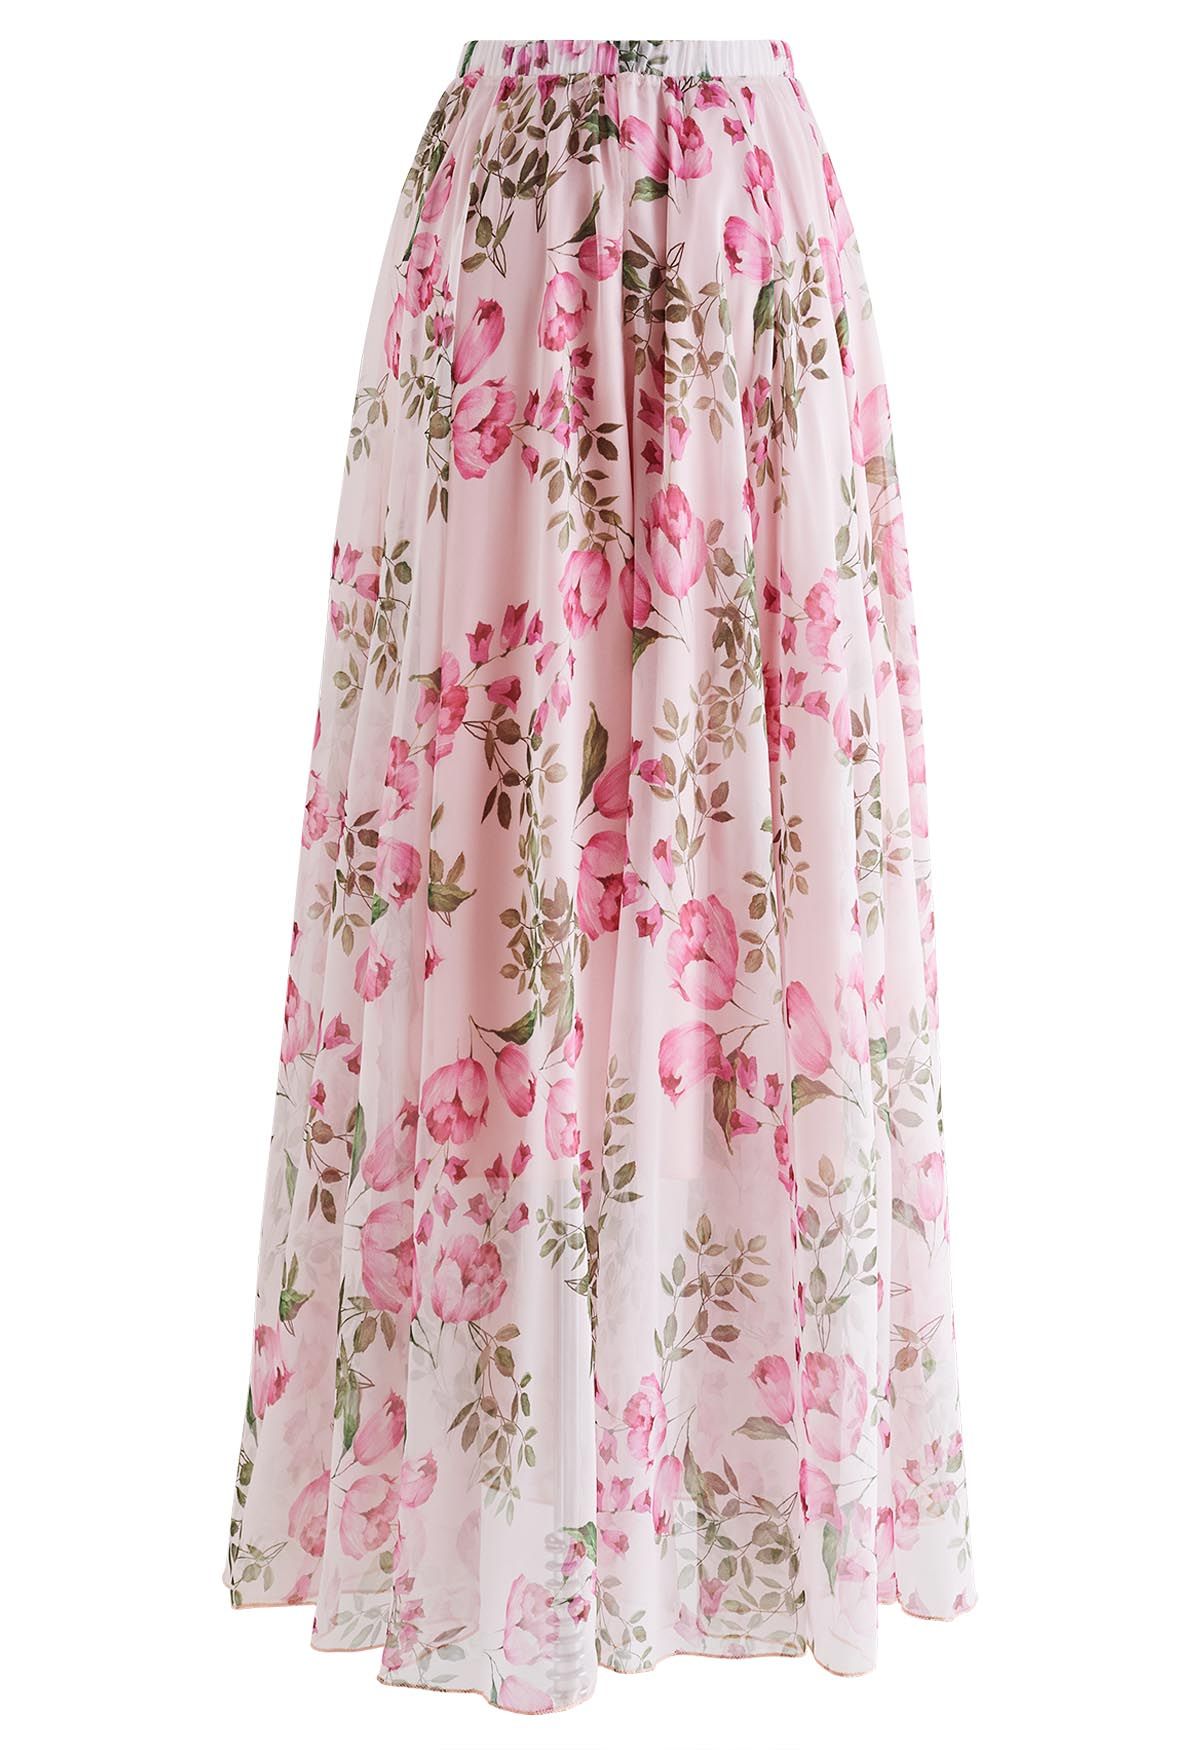 Pink Flower Bud Printed Chiffon Maxi Skirt - Retro, Indie and Unique ...